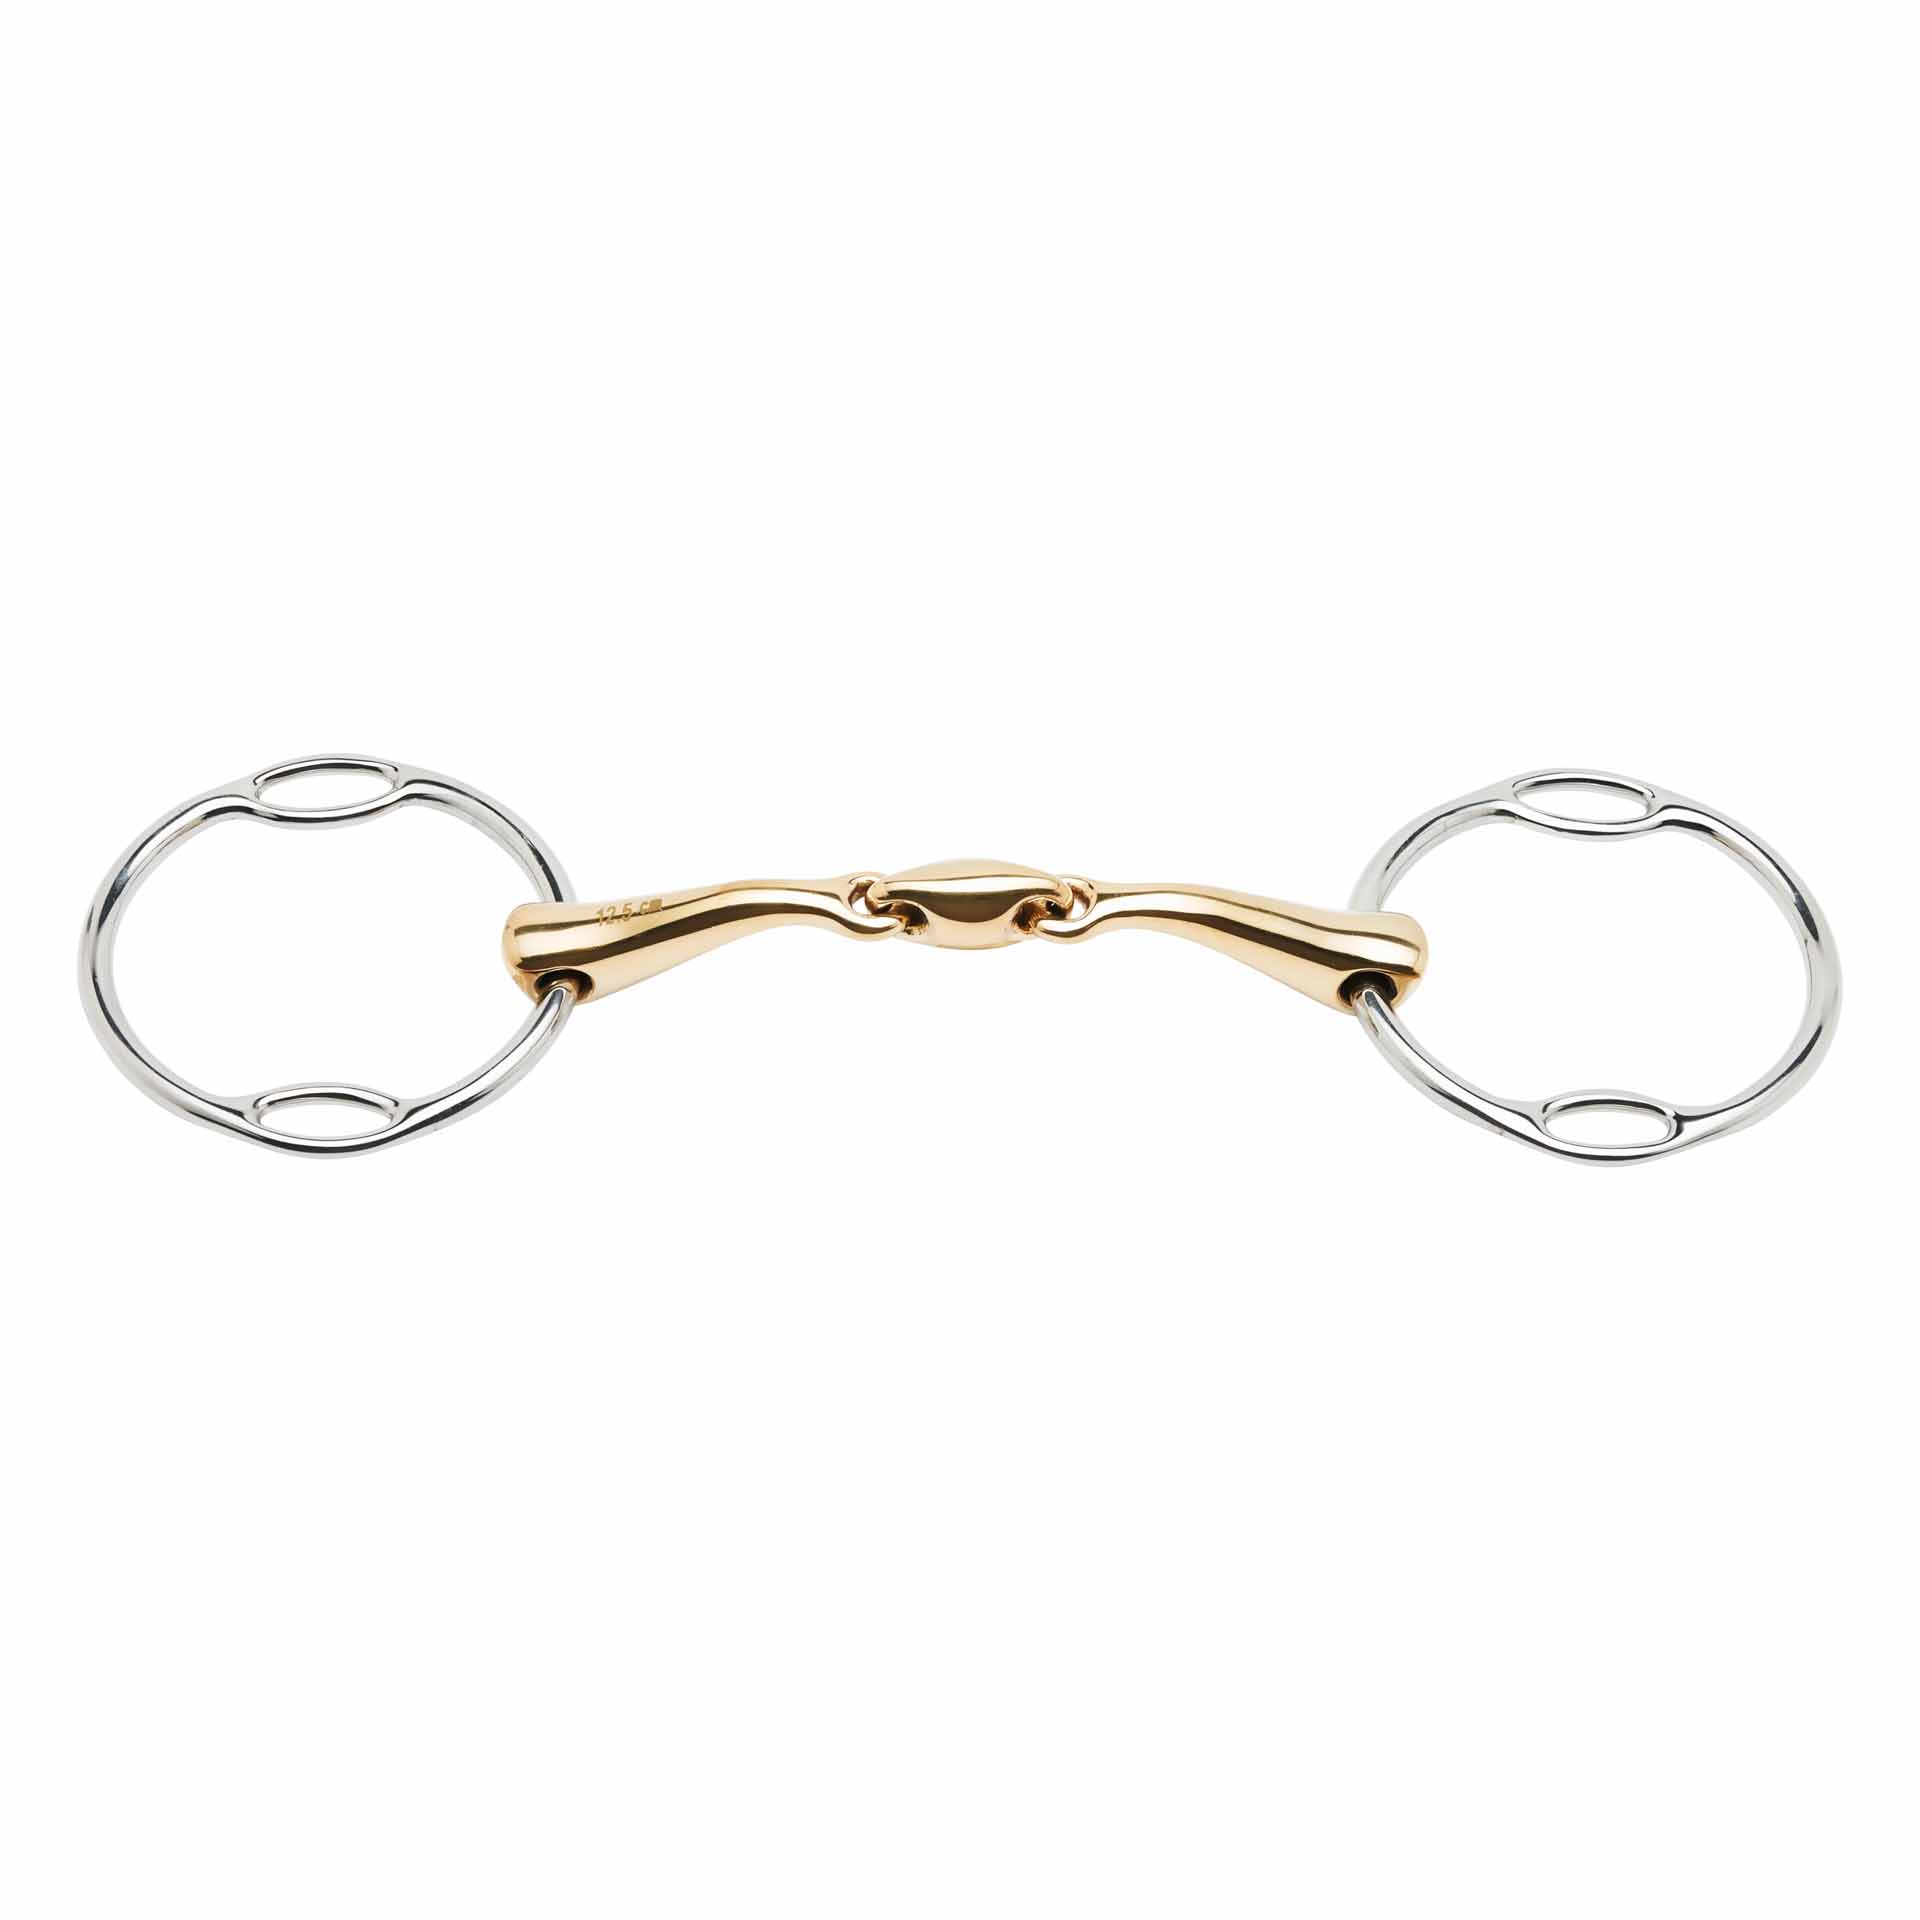 BUSSE Soft-Ring-Snaffle Bit KAUGAN®-SHAPED, 16 mm, French-Link 12.5 cm/70 mm 